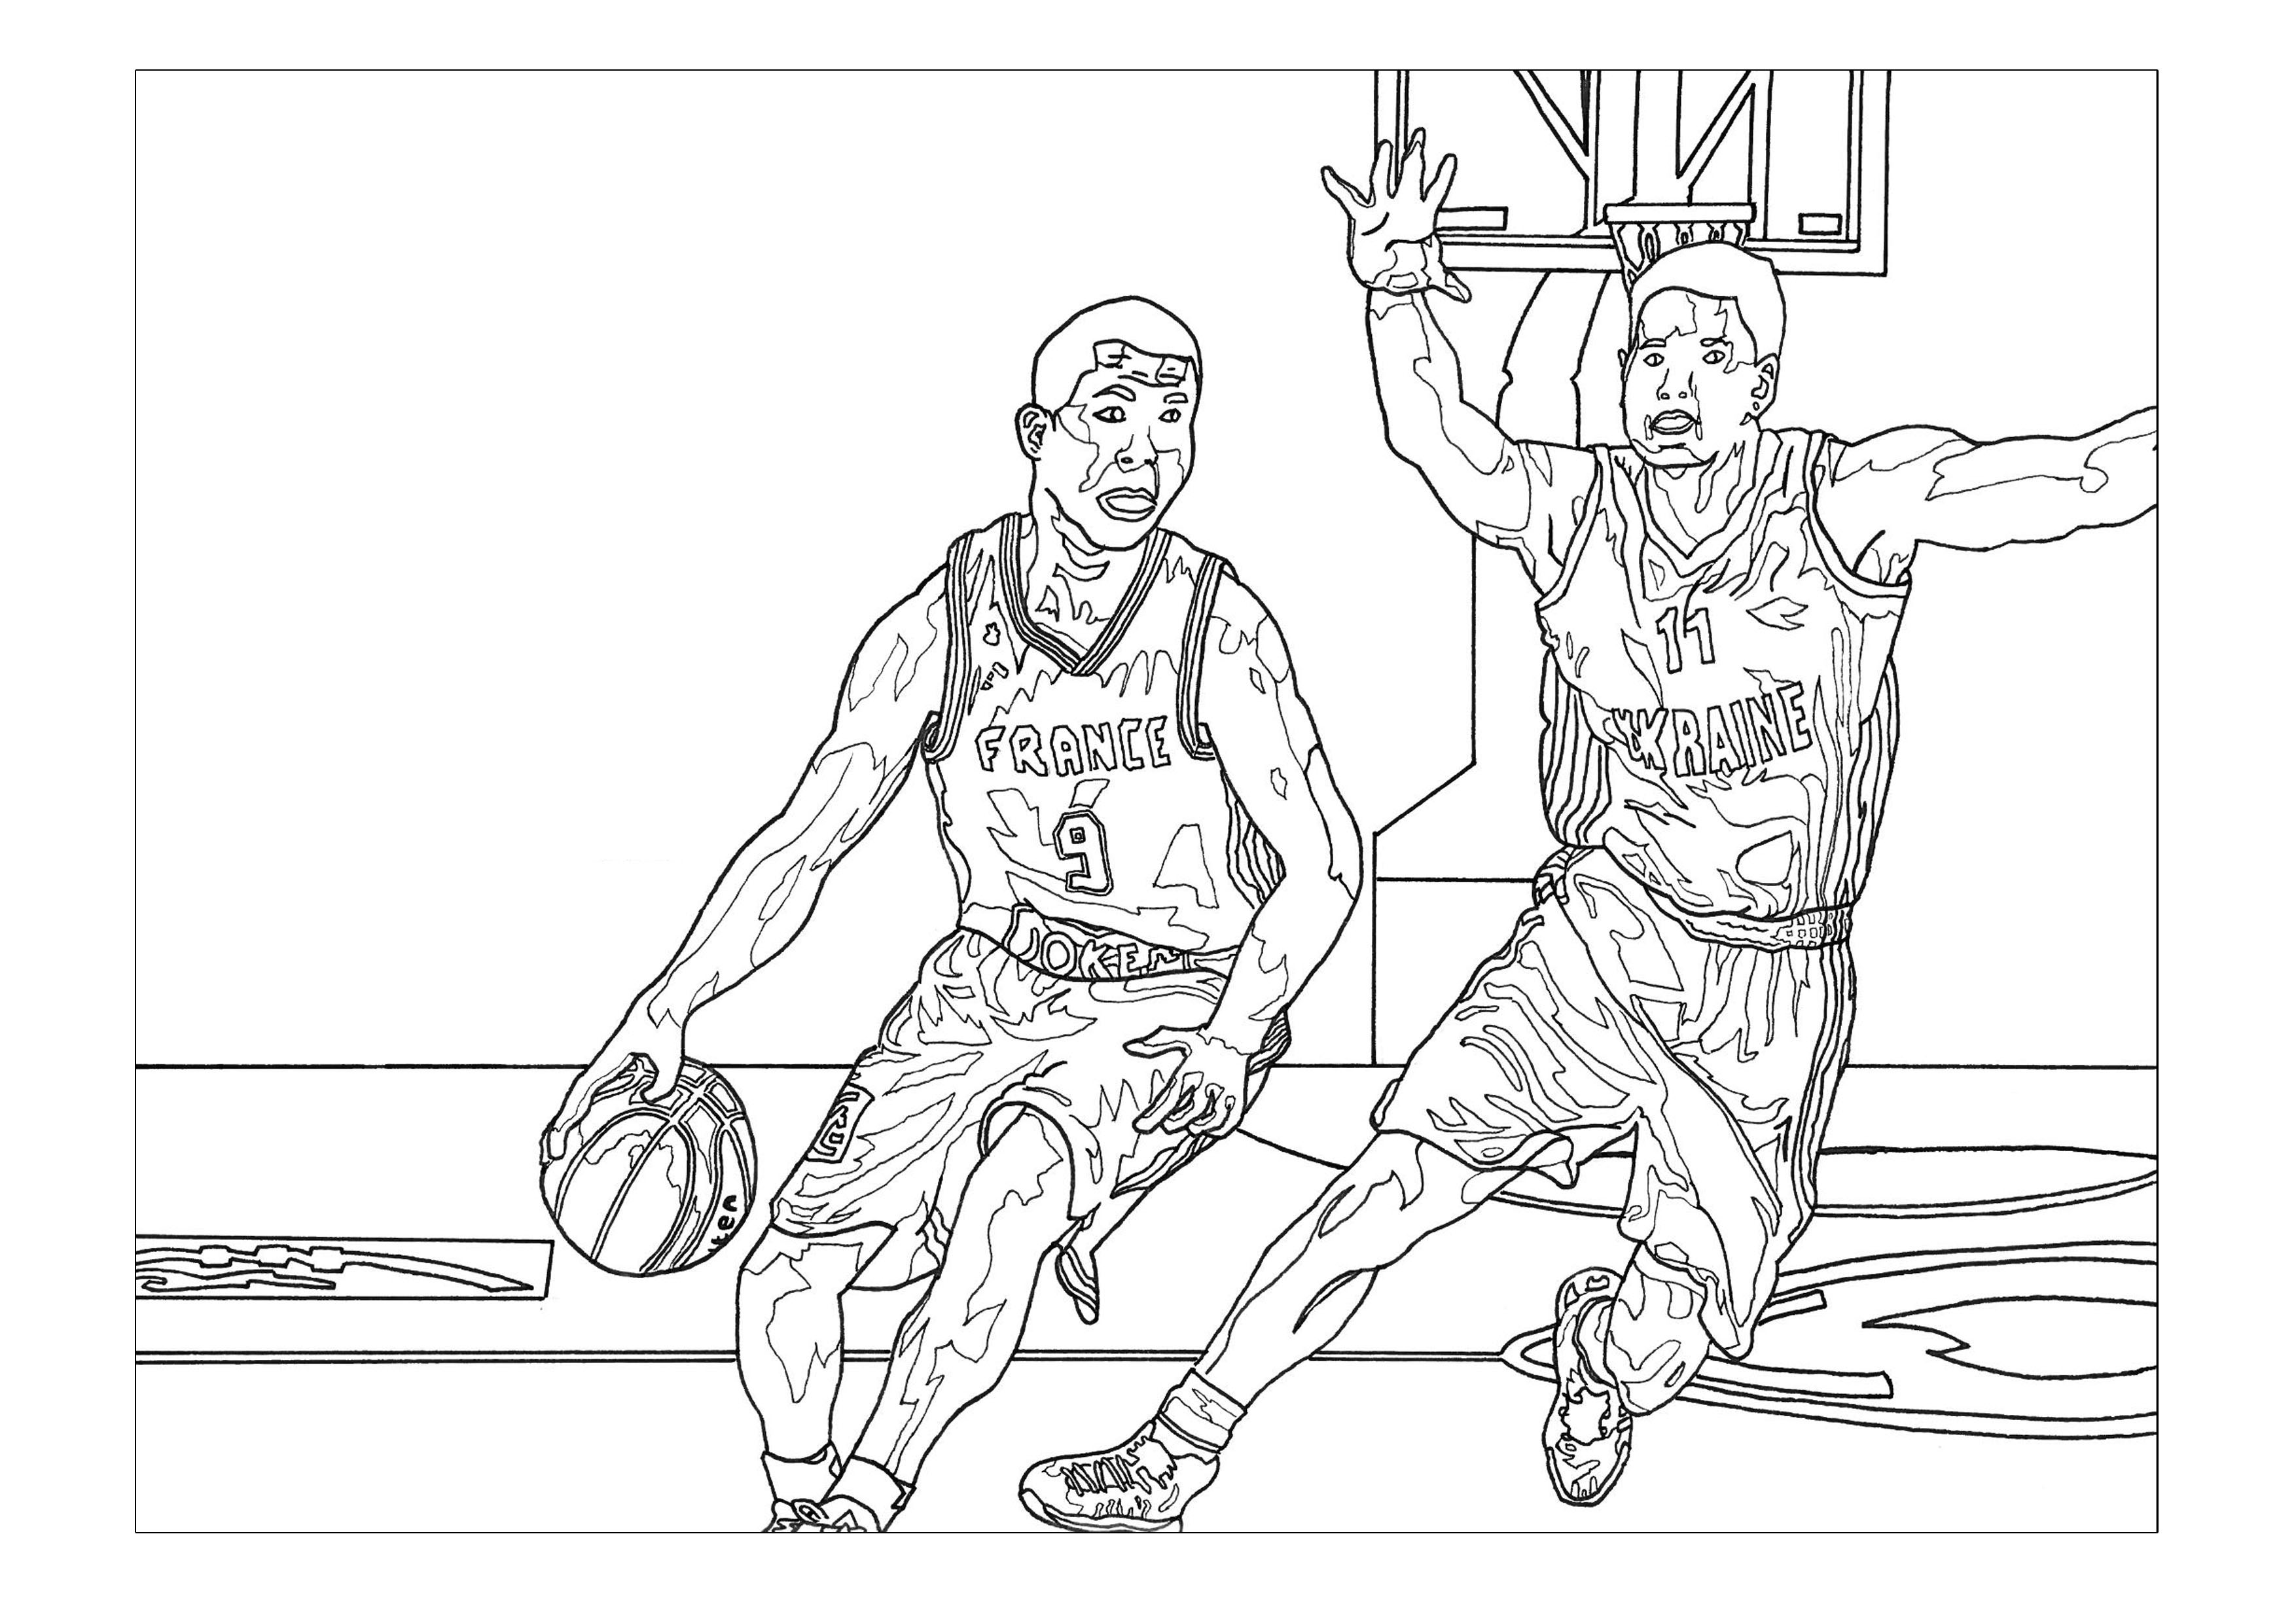 Sports coloring page to download